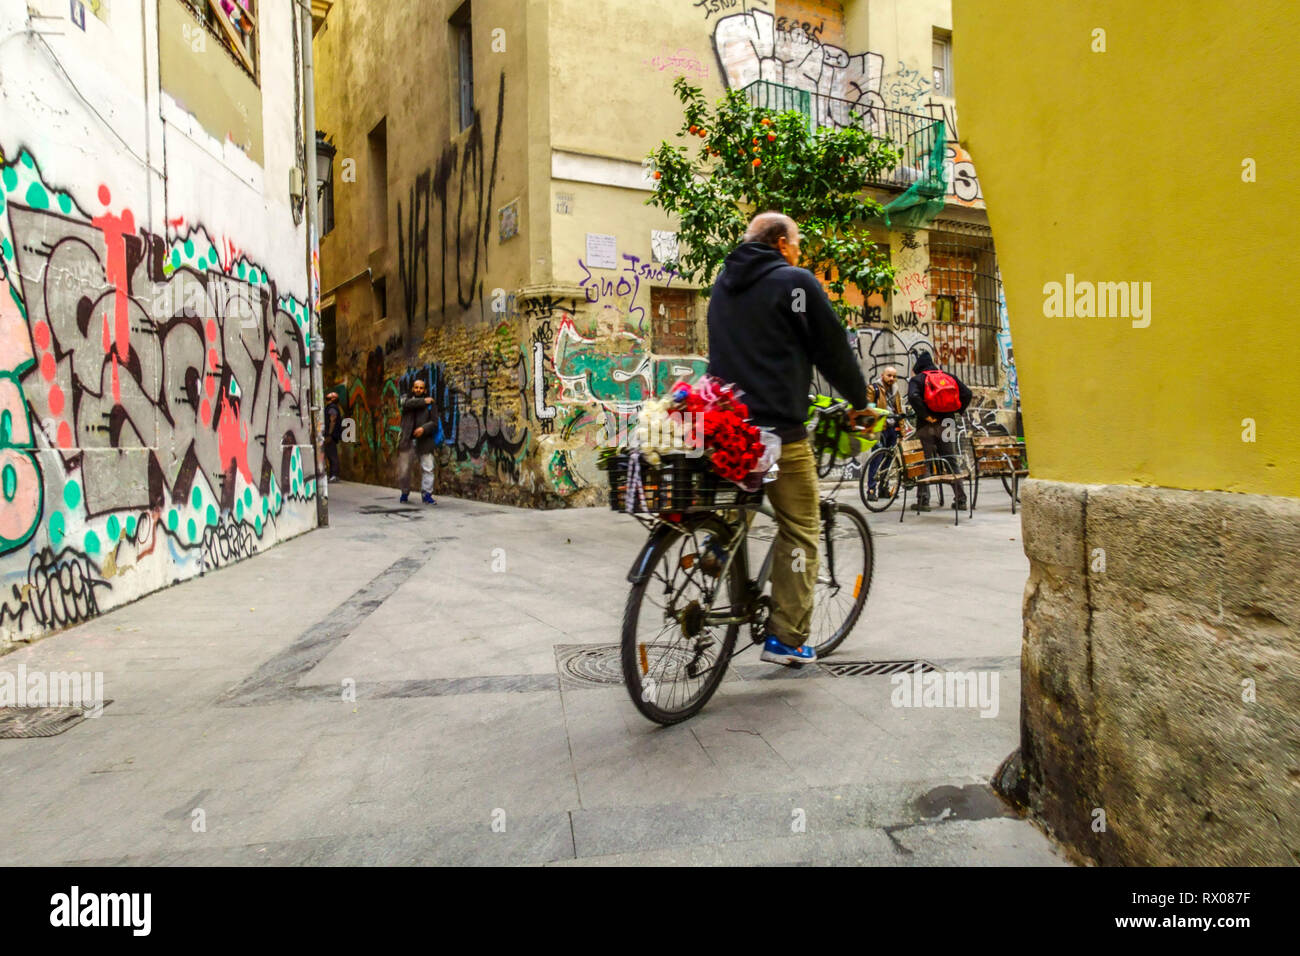 Man on a bicycle is delivering flowers, El Carmen district, Valencia Old Town, Spain Stock Photo